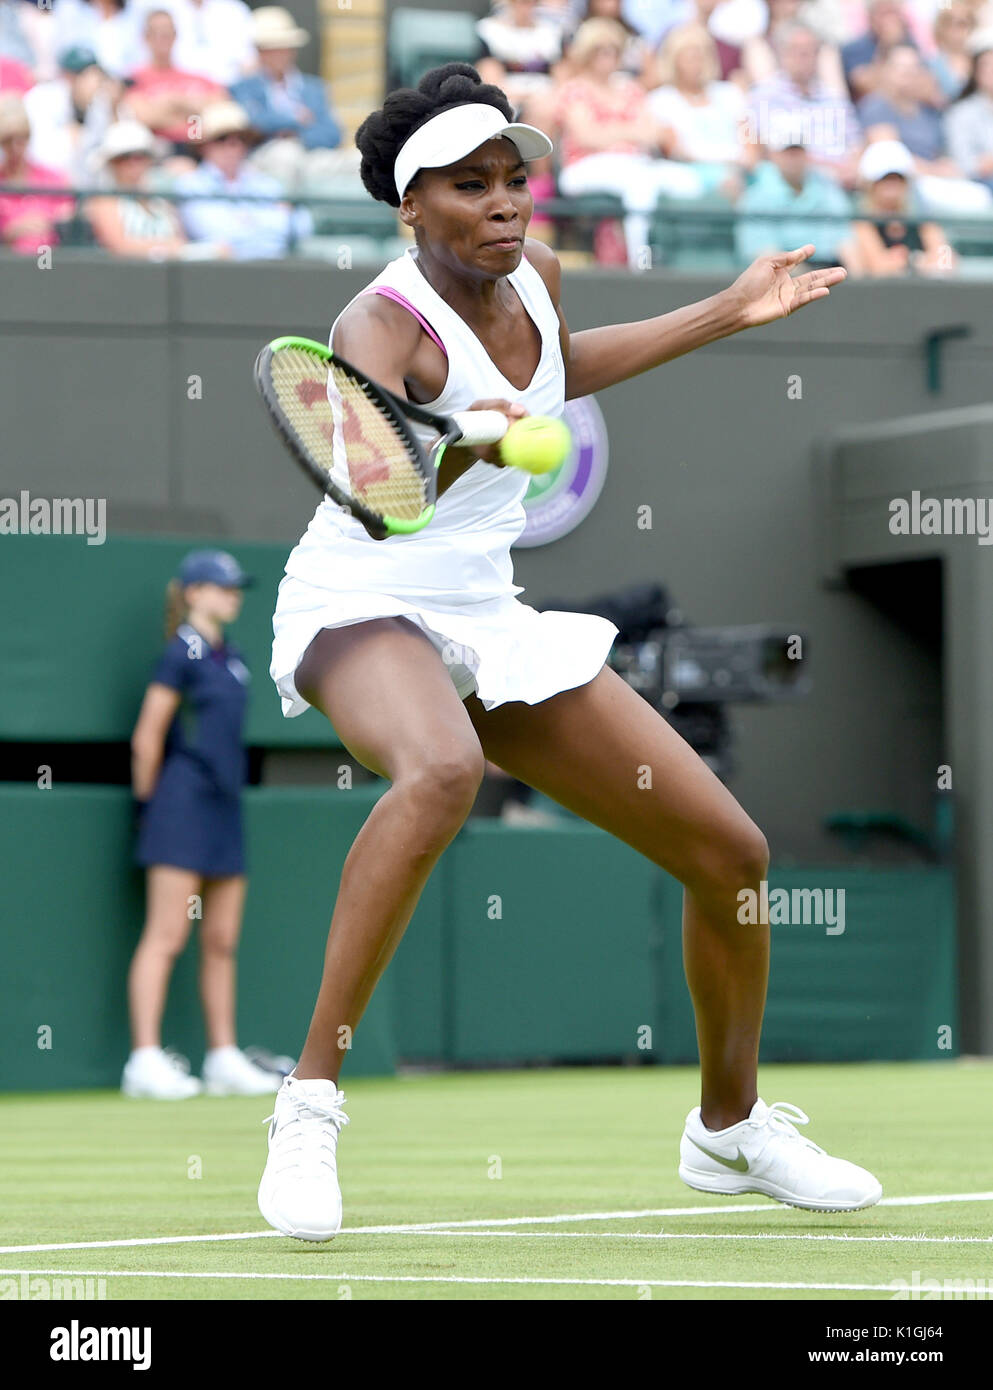 Photo Must Be Credited ©Alpha Press 079965 03/07/2017 Venus Williams during Day One Of The Wimbledon Tennis Championships 2017 London Stock Photo